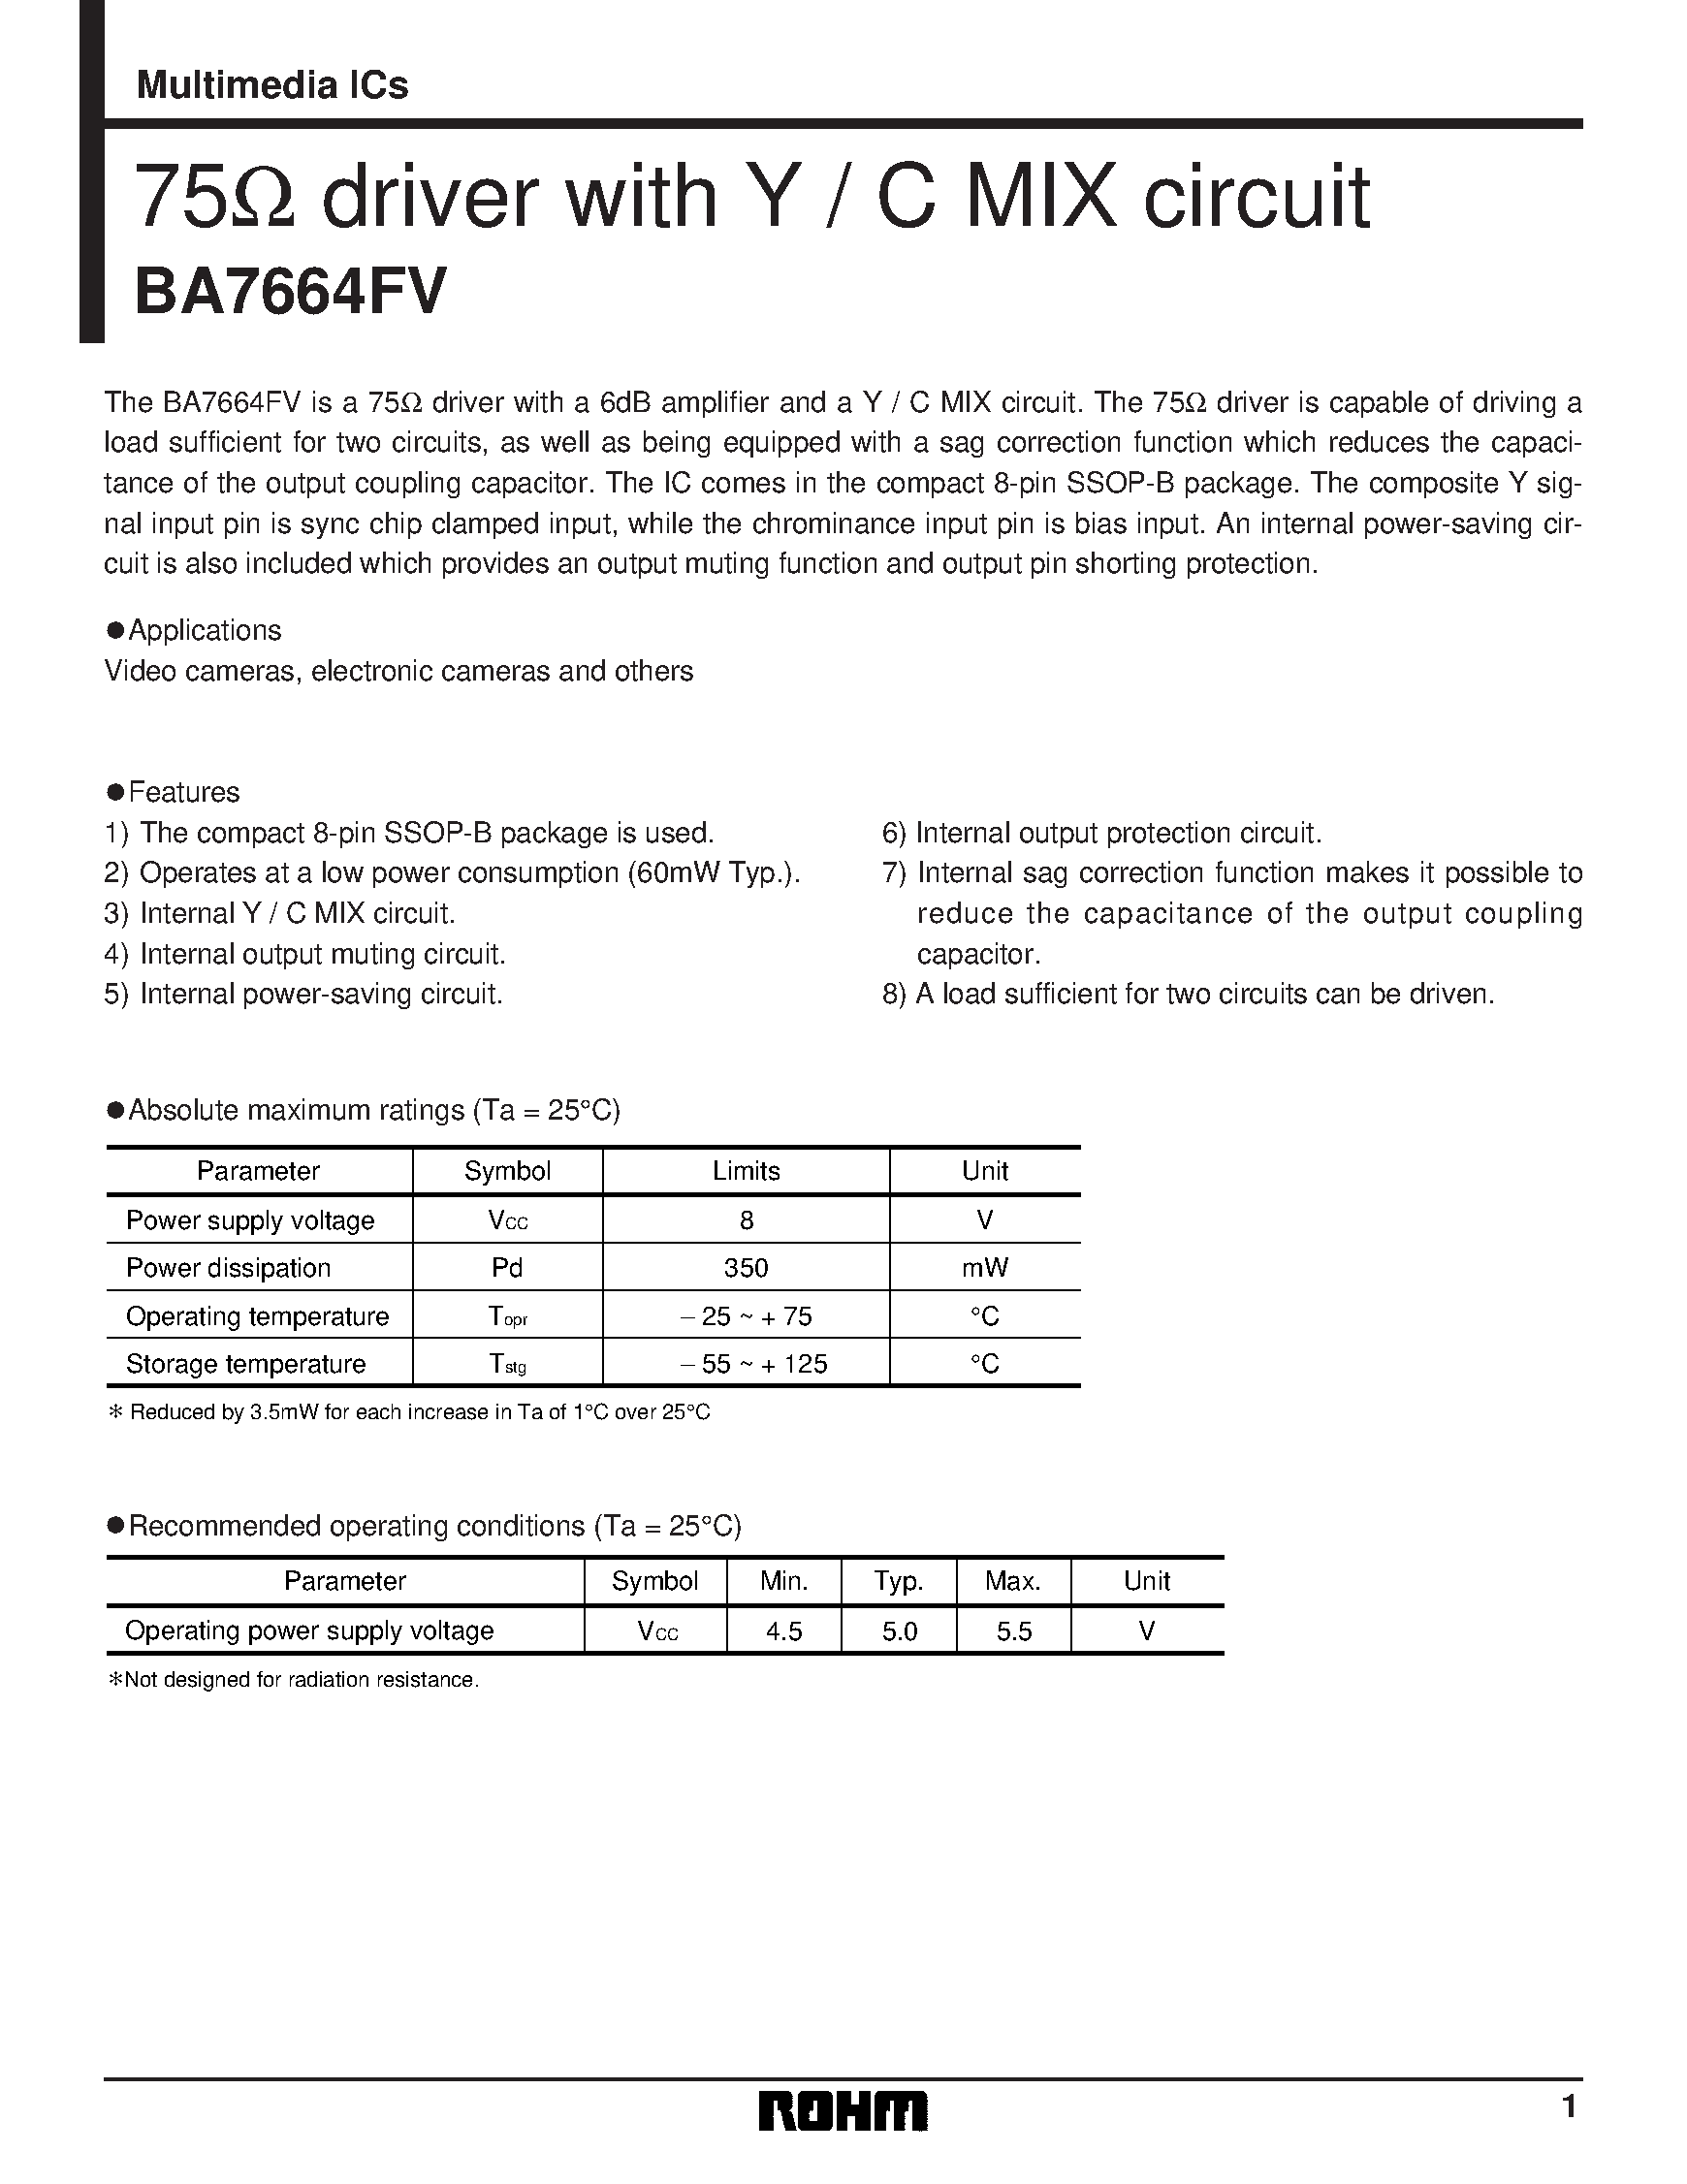 Datasheet BA7664FV - 75 driver with Y / C MIX circuit page 1